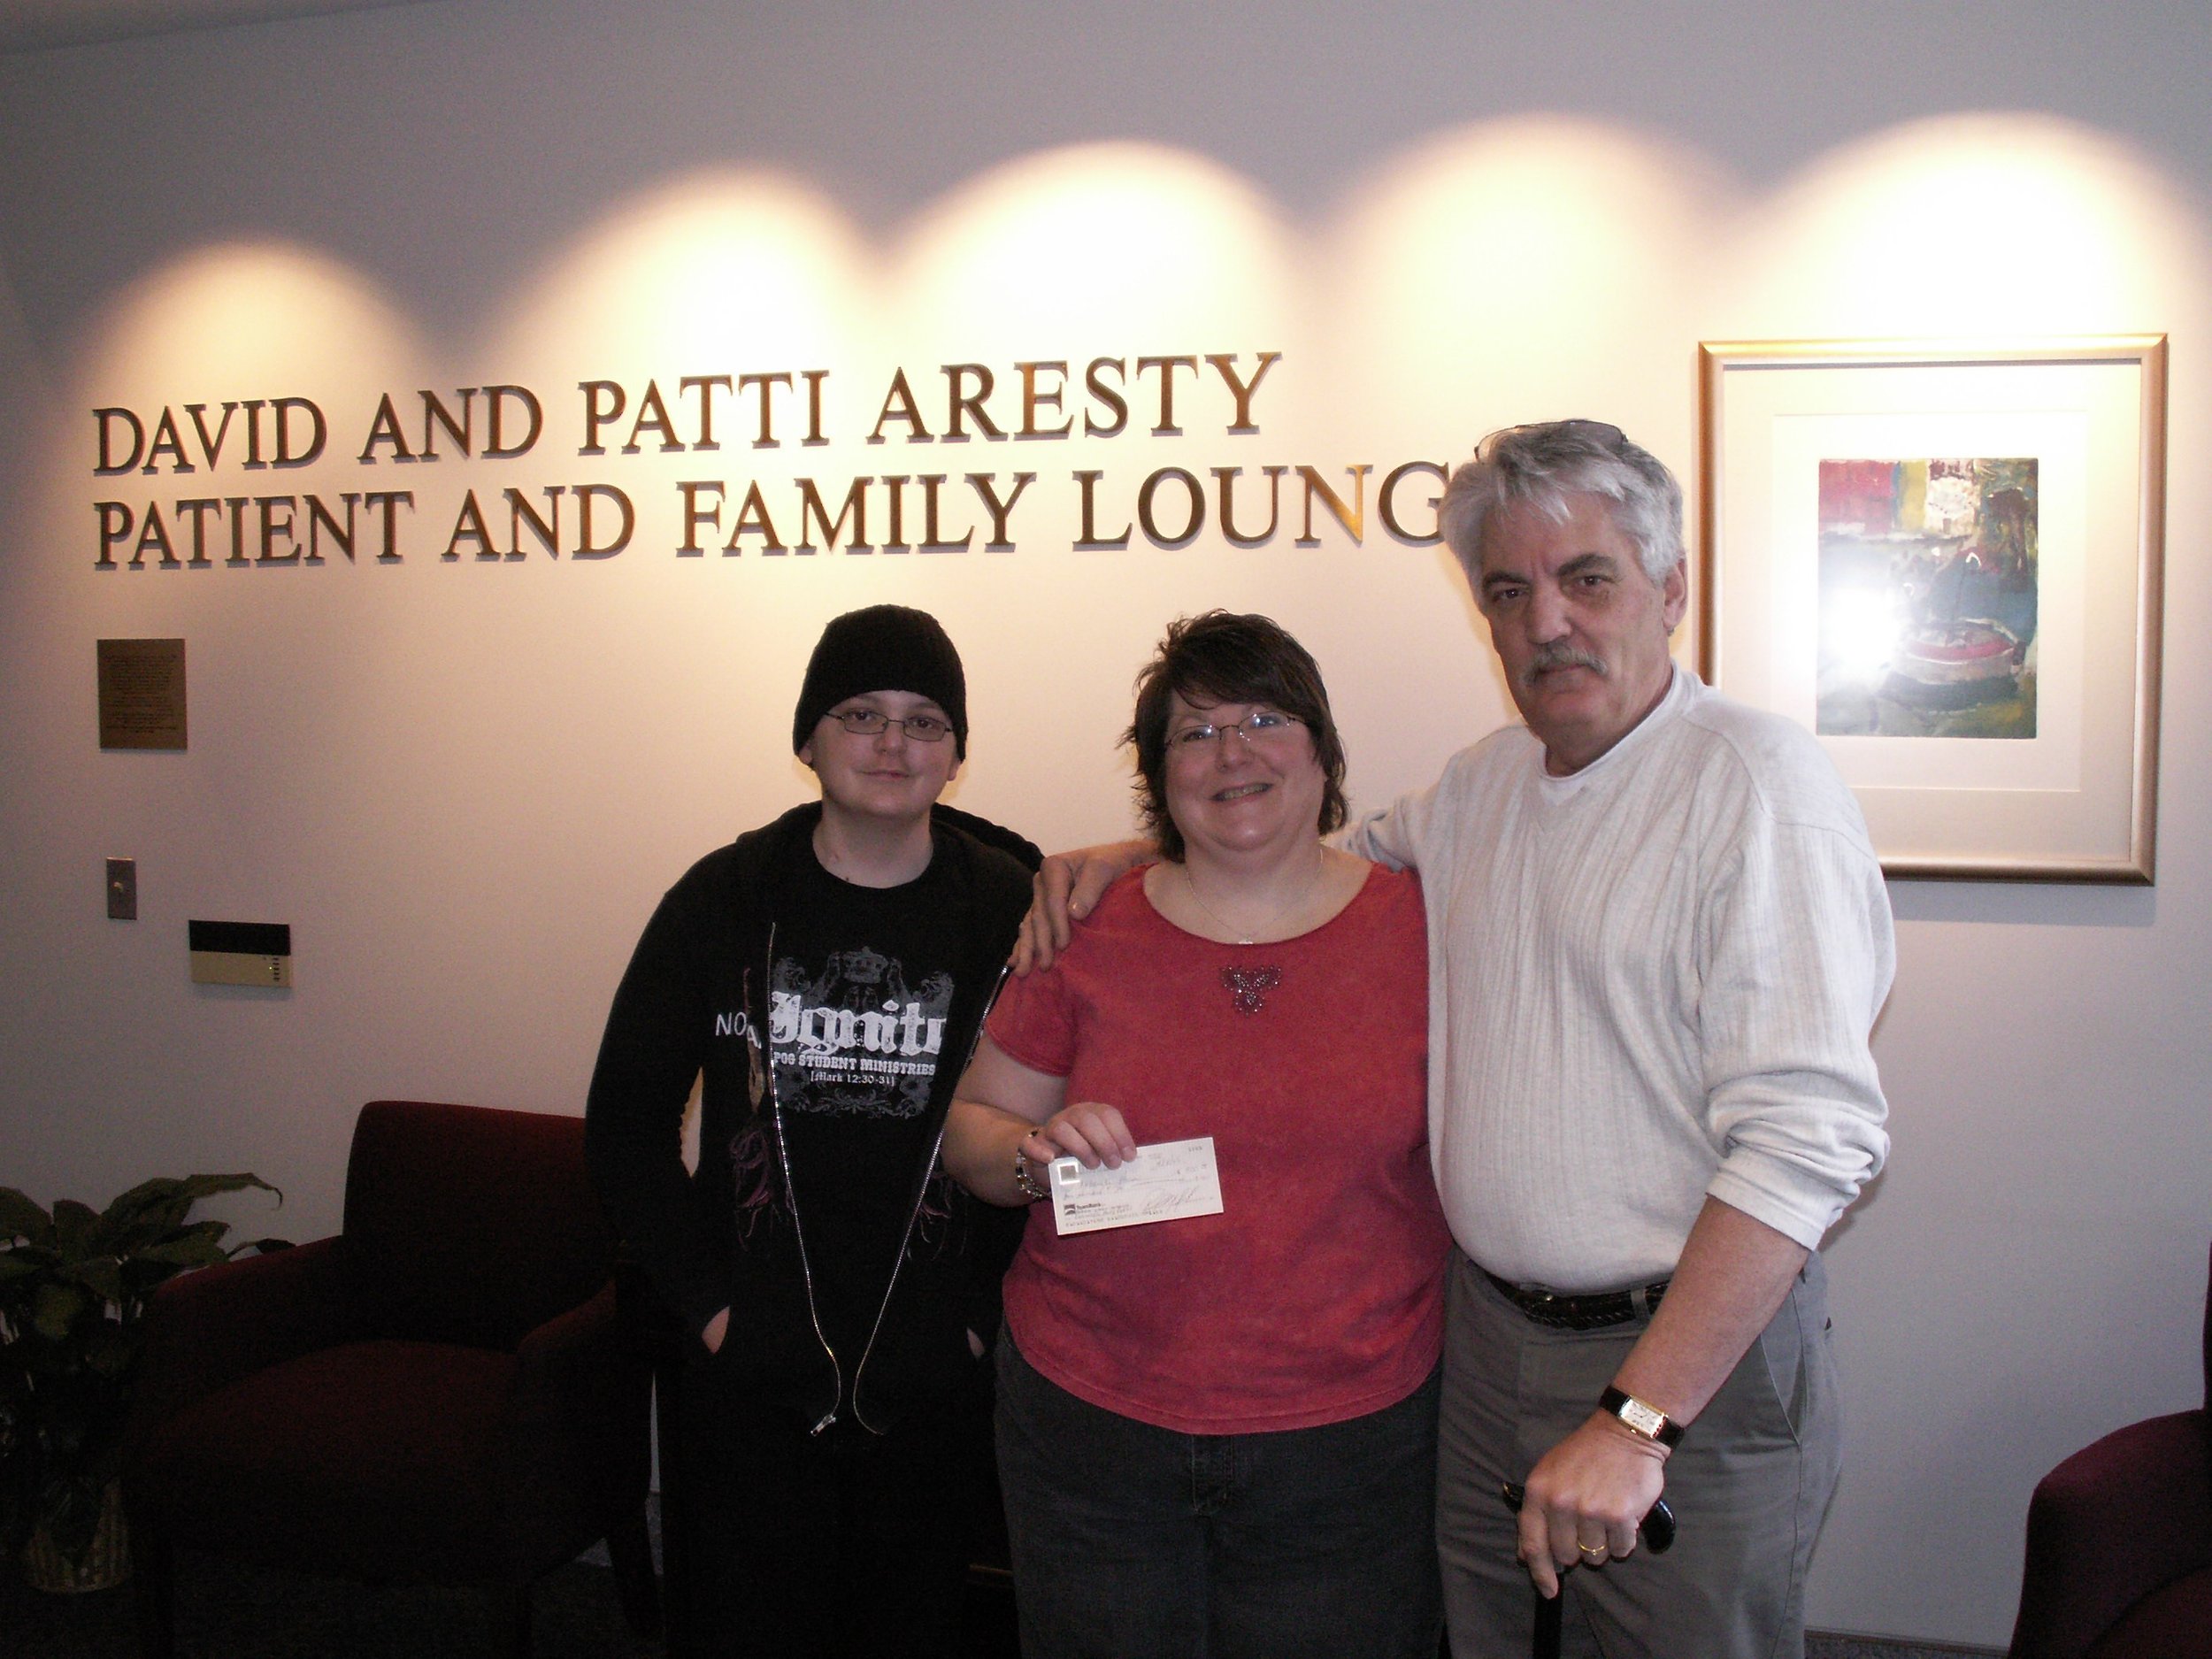  Andy Pickrel with Chuck  presenting them with a check to use for their stay at the transplant center  